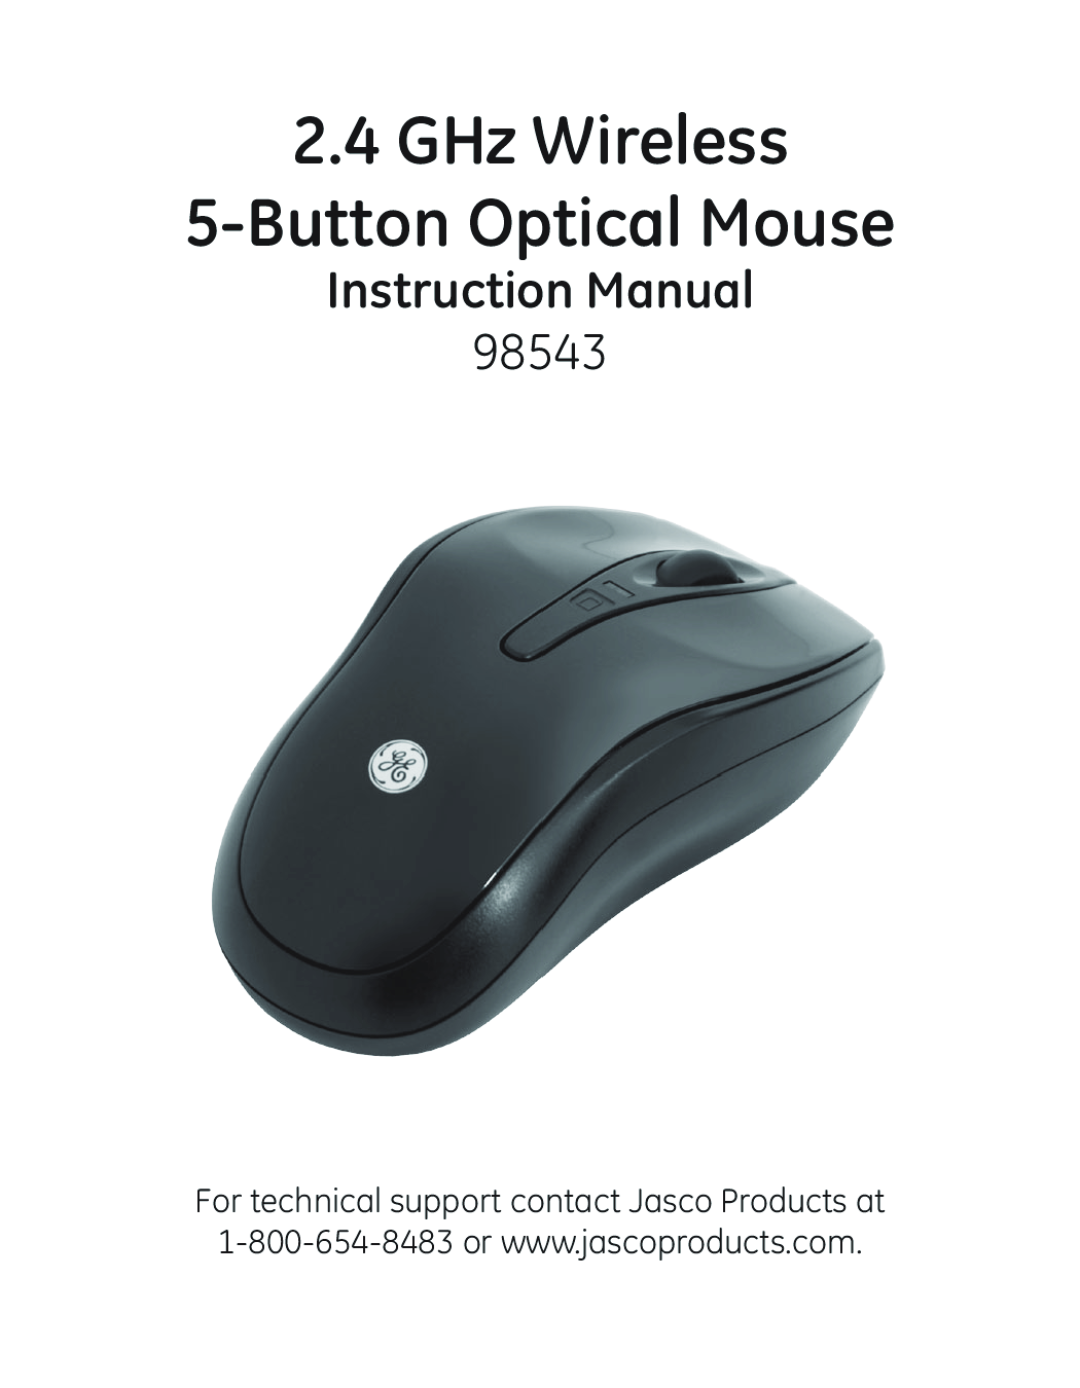 Jasco 98543 instruction manual GHz Wireless 5-Button Optical Mouse 